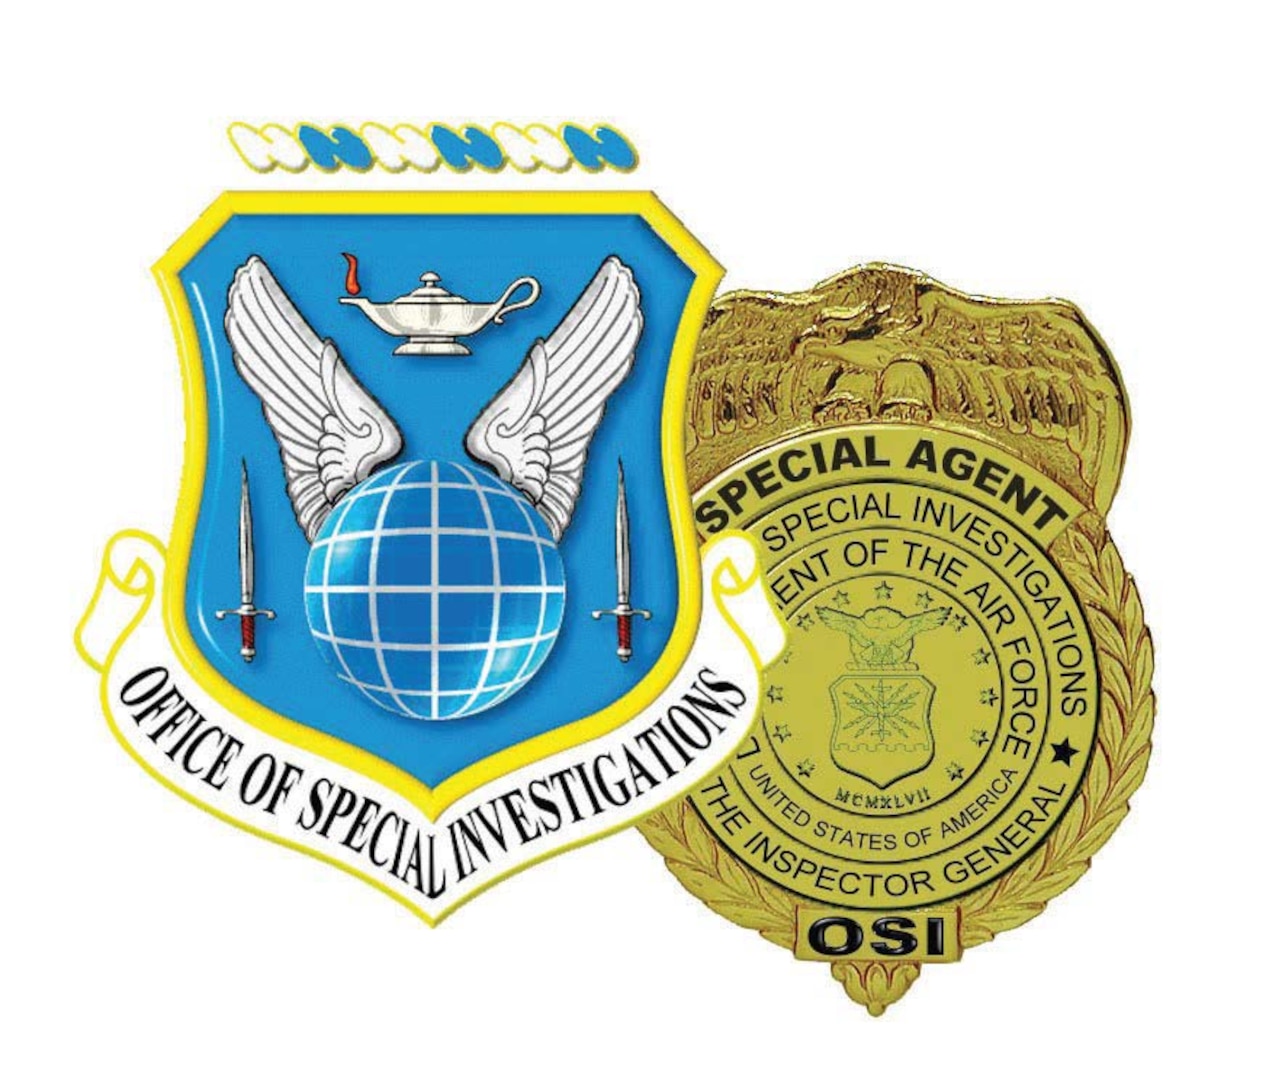 The Air Force Office of Special Investigations is actively seeking enlisted Airmen in the ranks of senior airman through technical sergeant to cross-train into the 7SXXX Air Force Specialty Code and serve as AFOSI special agents.
Originally founded in 1948, AFOSI is modeled after the Federal Bureau of Investigation and investigates all felony-level crimes involving Air Force people and property.